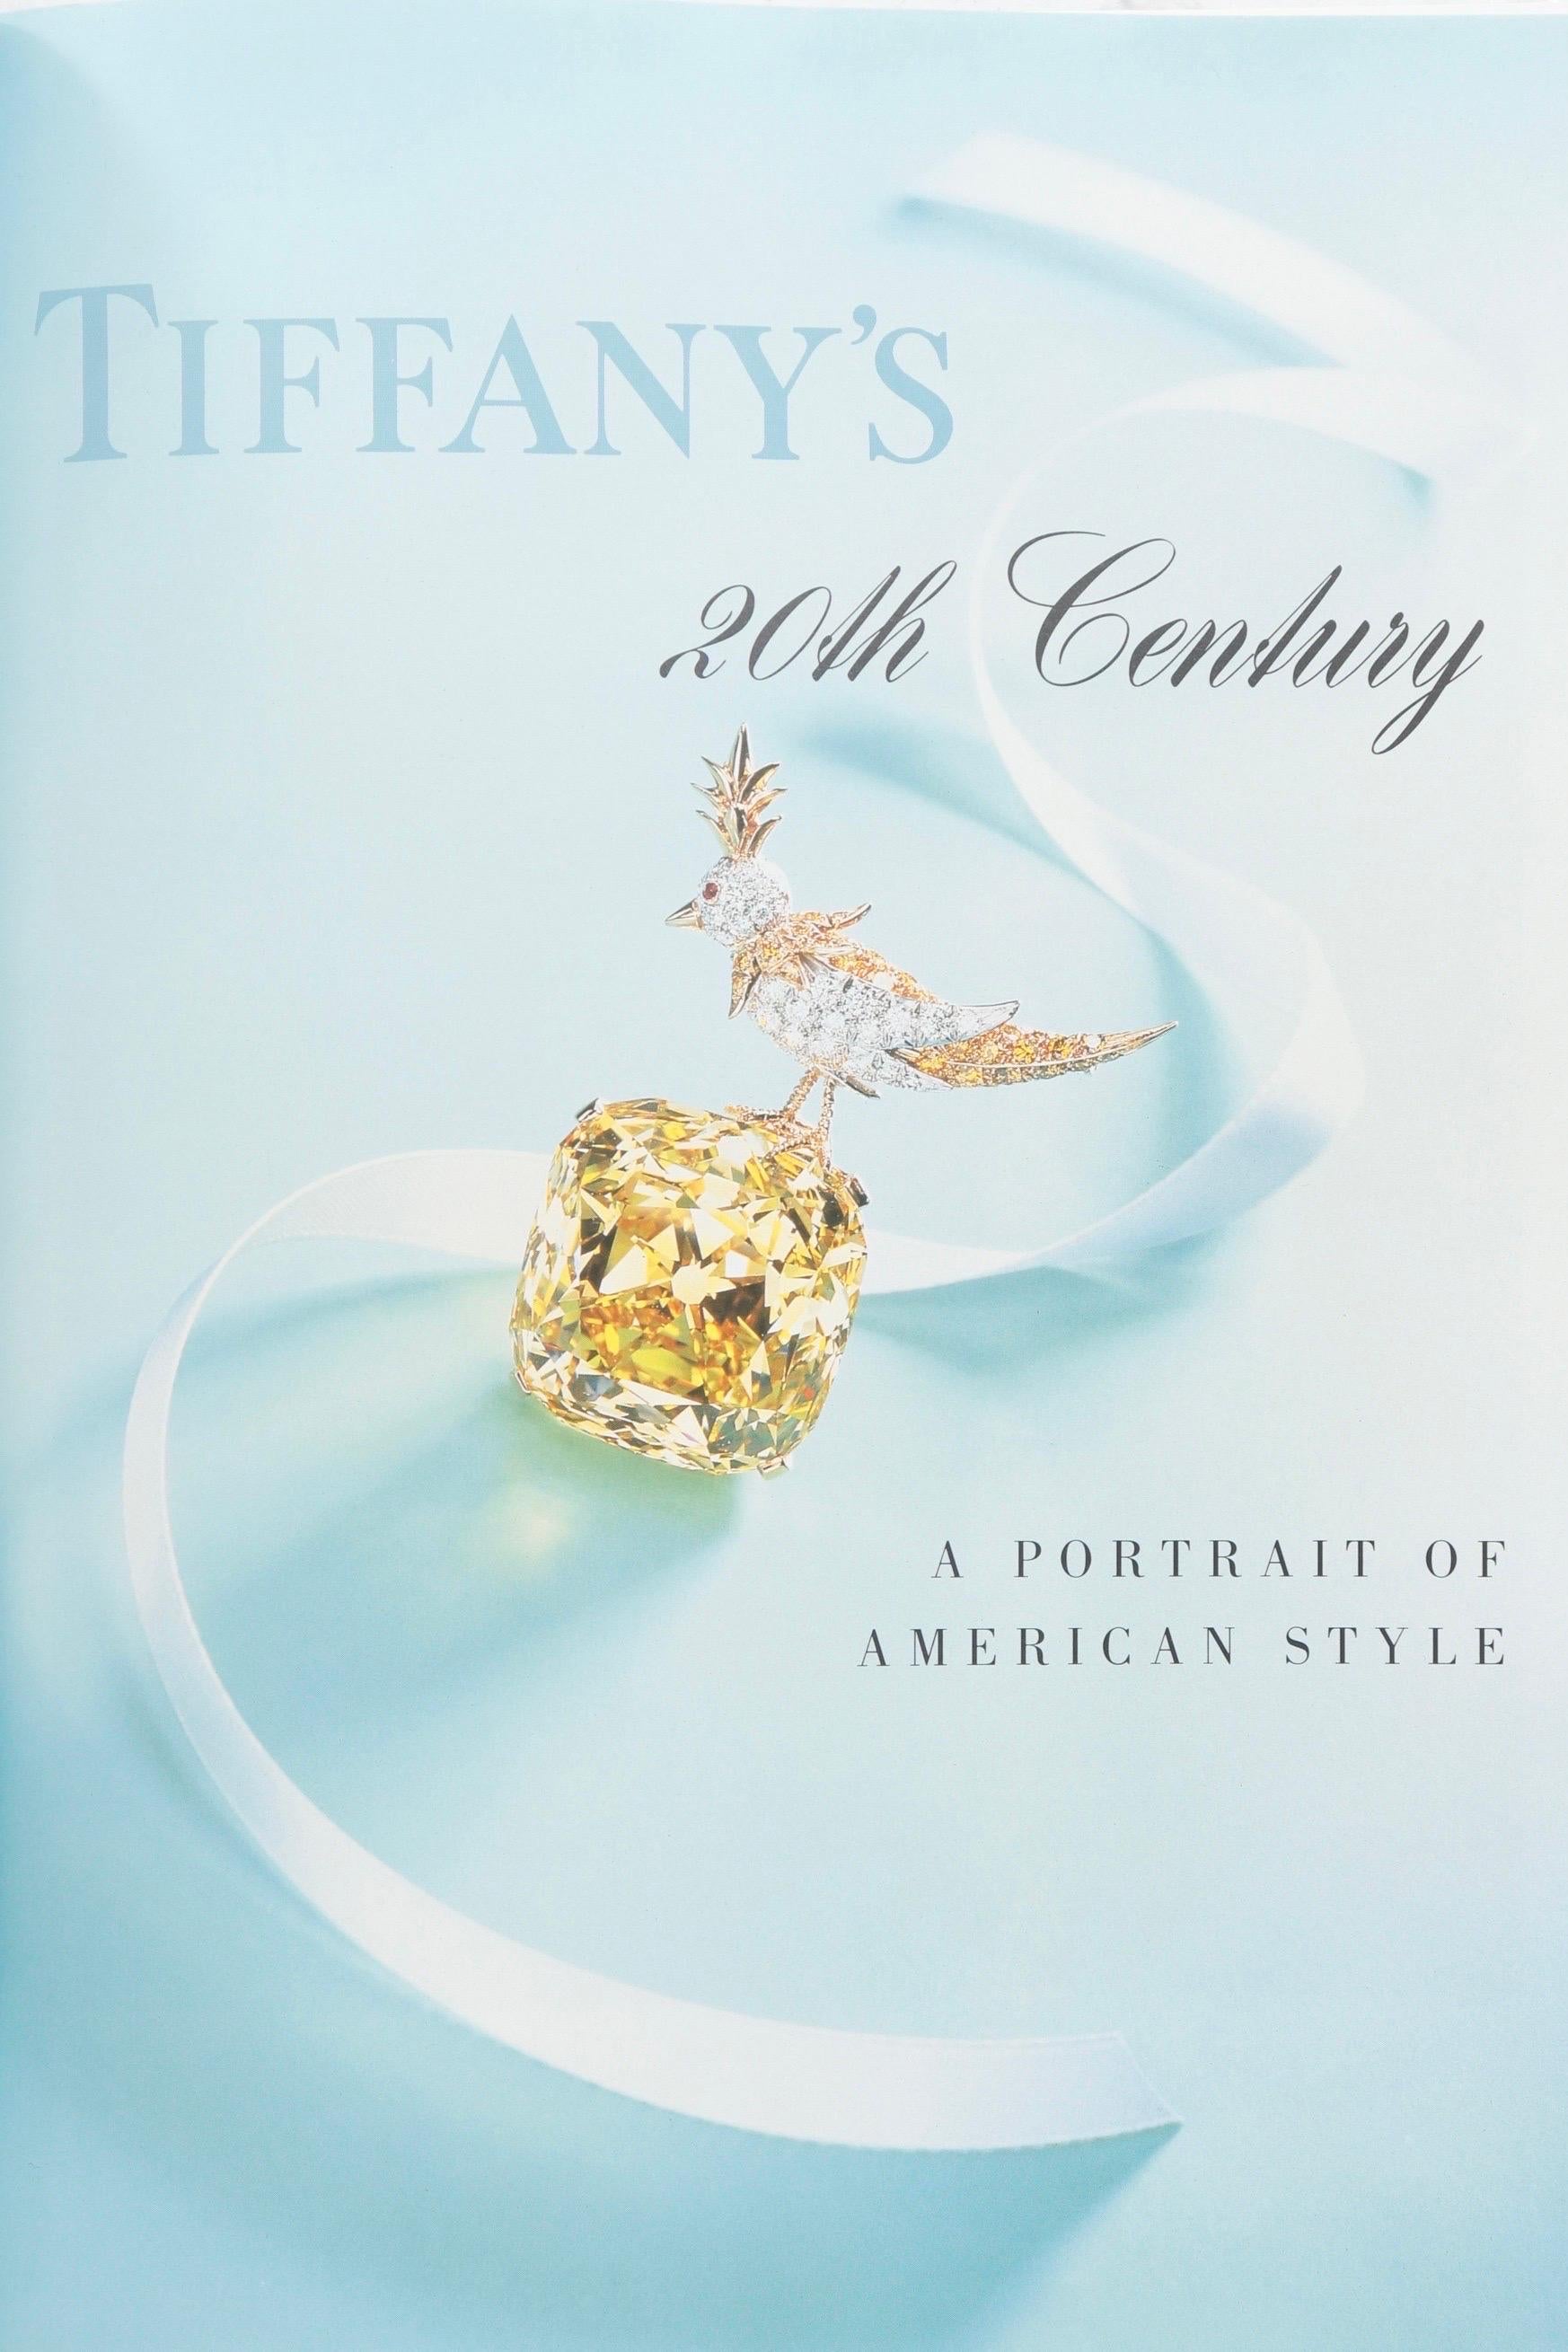 Tiffany's 20th Century by John Loring In Good Condition For Sale In Bradenton, FL